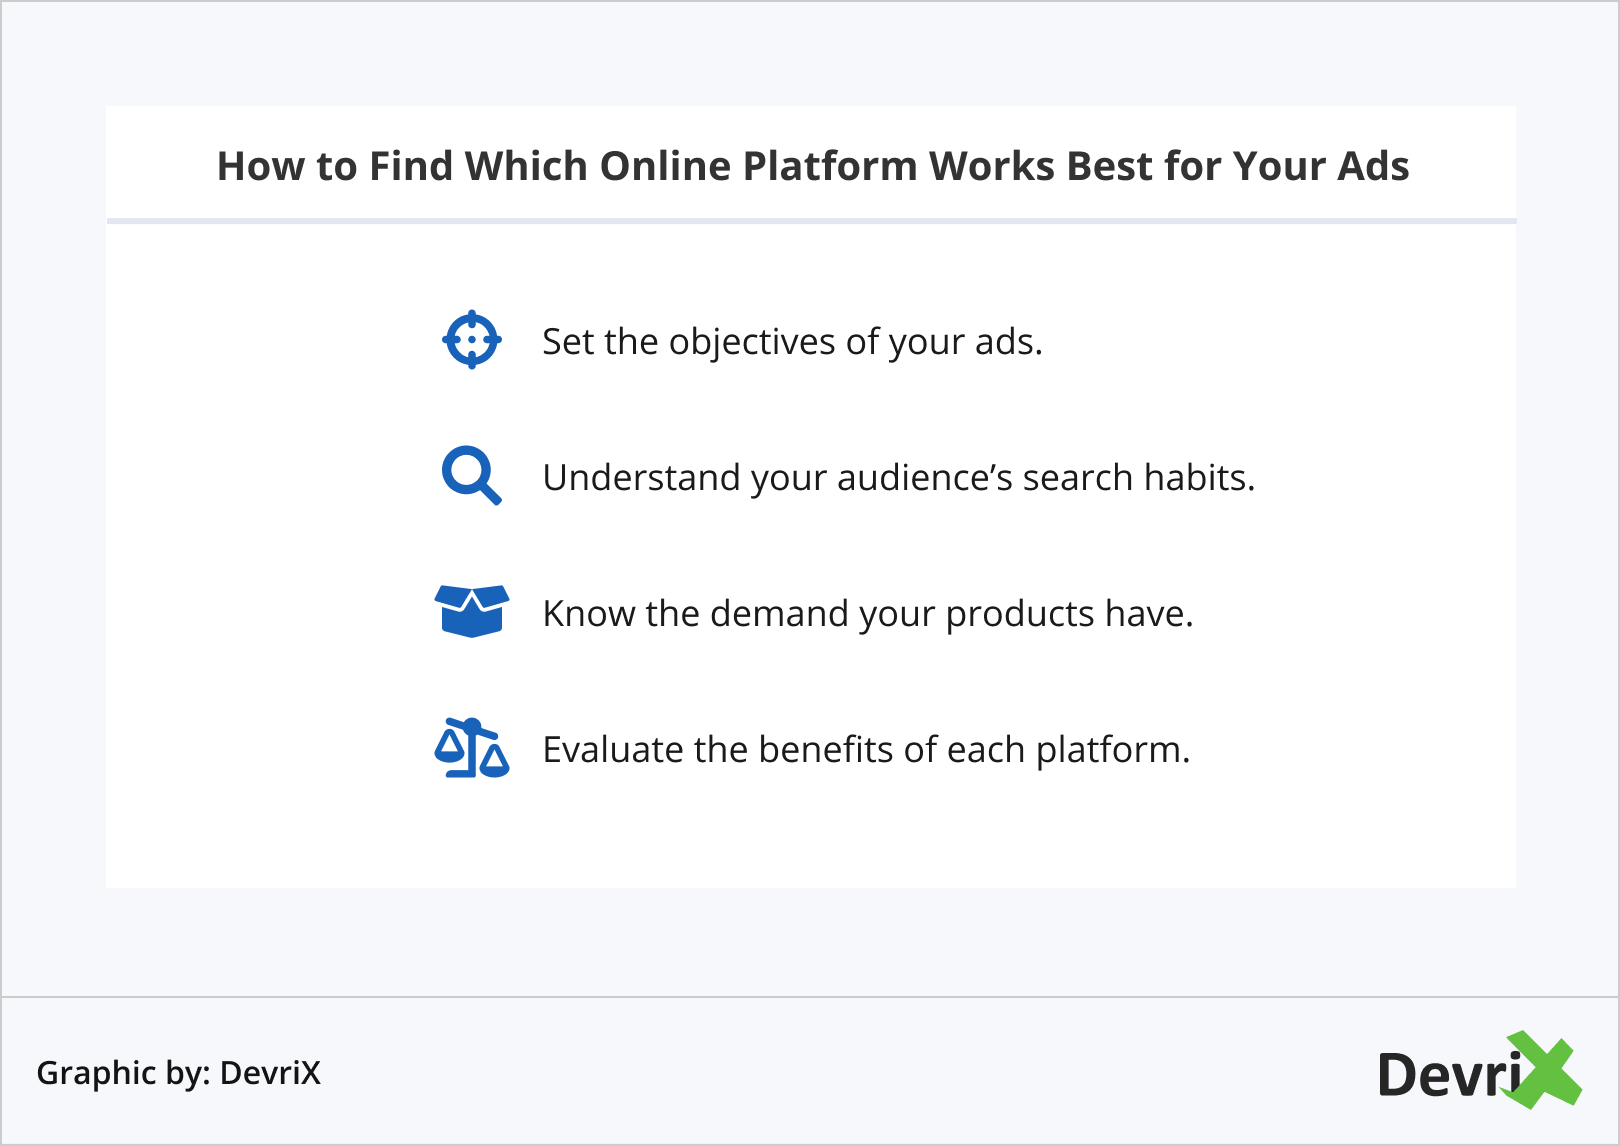 How to Find Which Online Platform Works Best for Your Ads